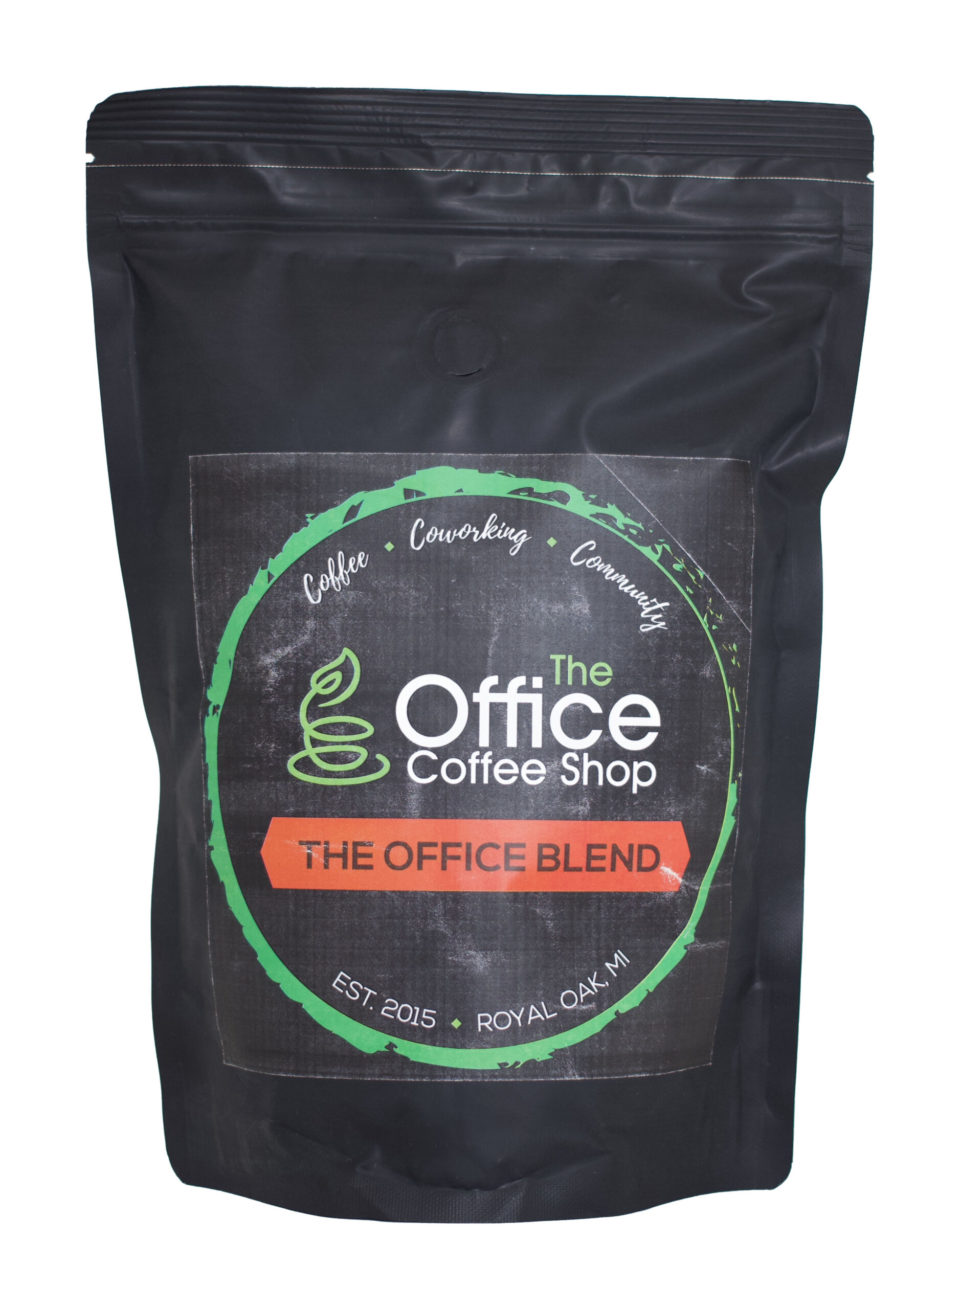 The Office Blend!